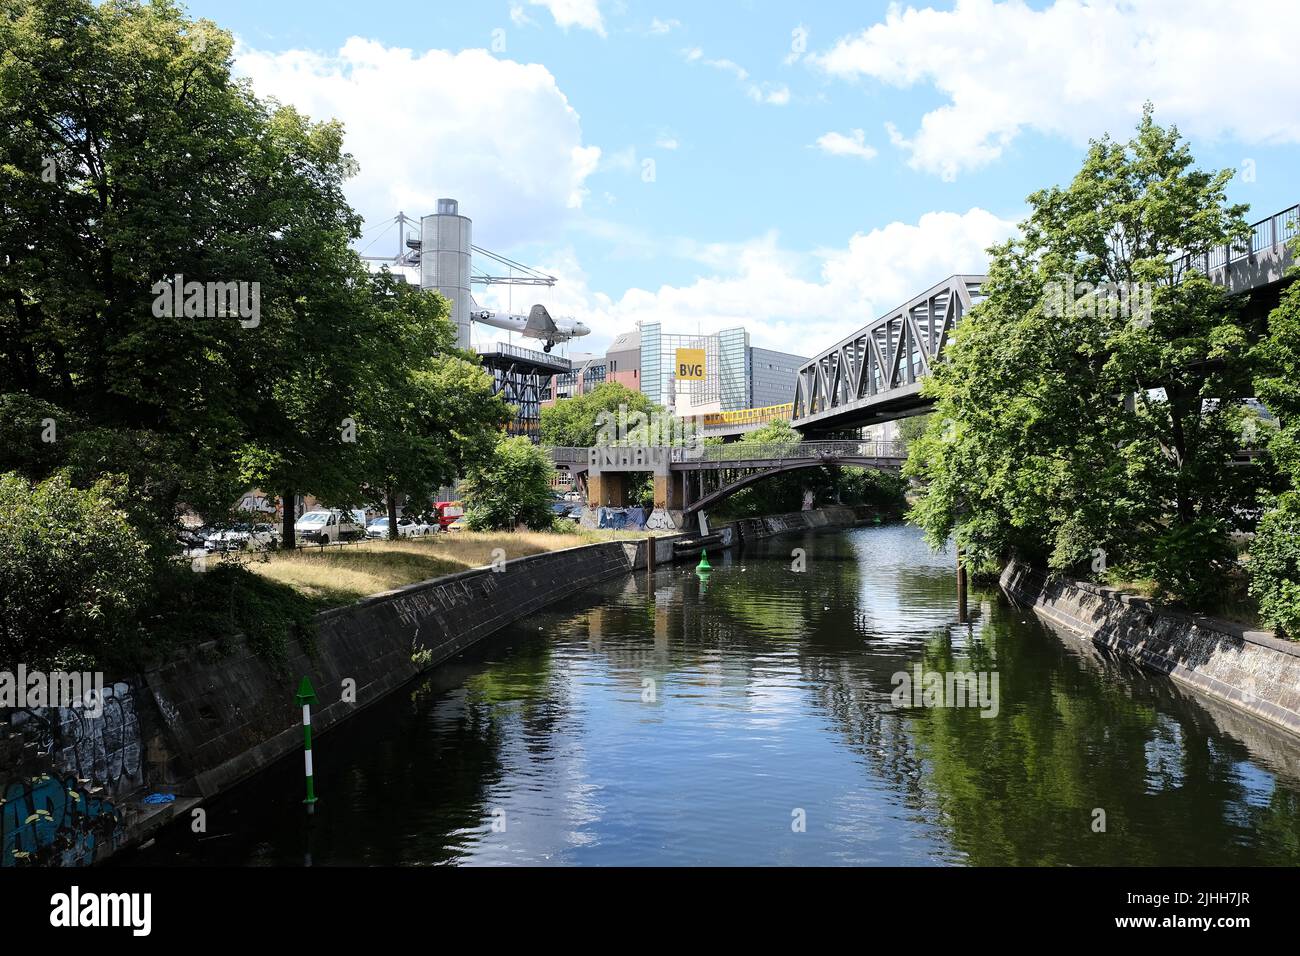 Berlin, Germany, July 11, 2022, view over the Landwehrkanal with iron girder bridge of the elevated railroad, BVG sign and the old DC 3 at the museum Stock Photo